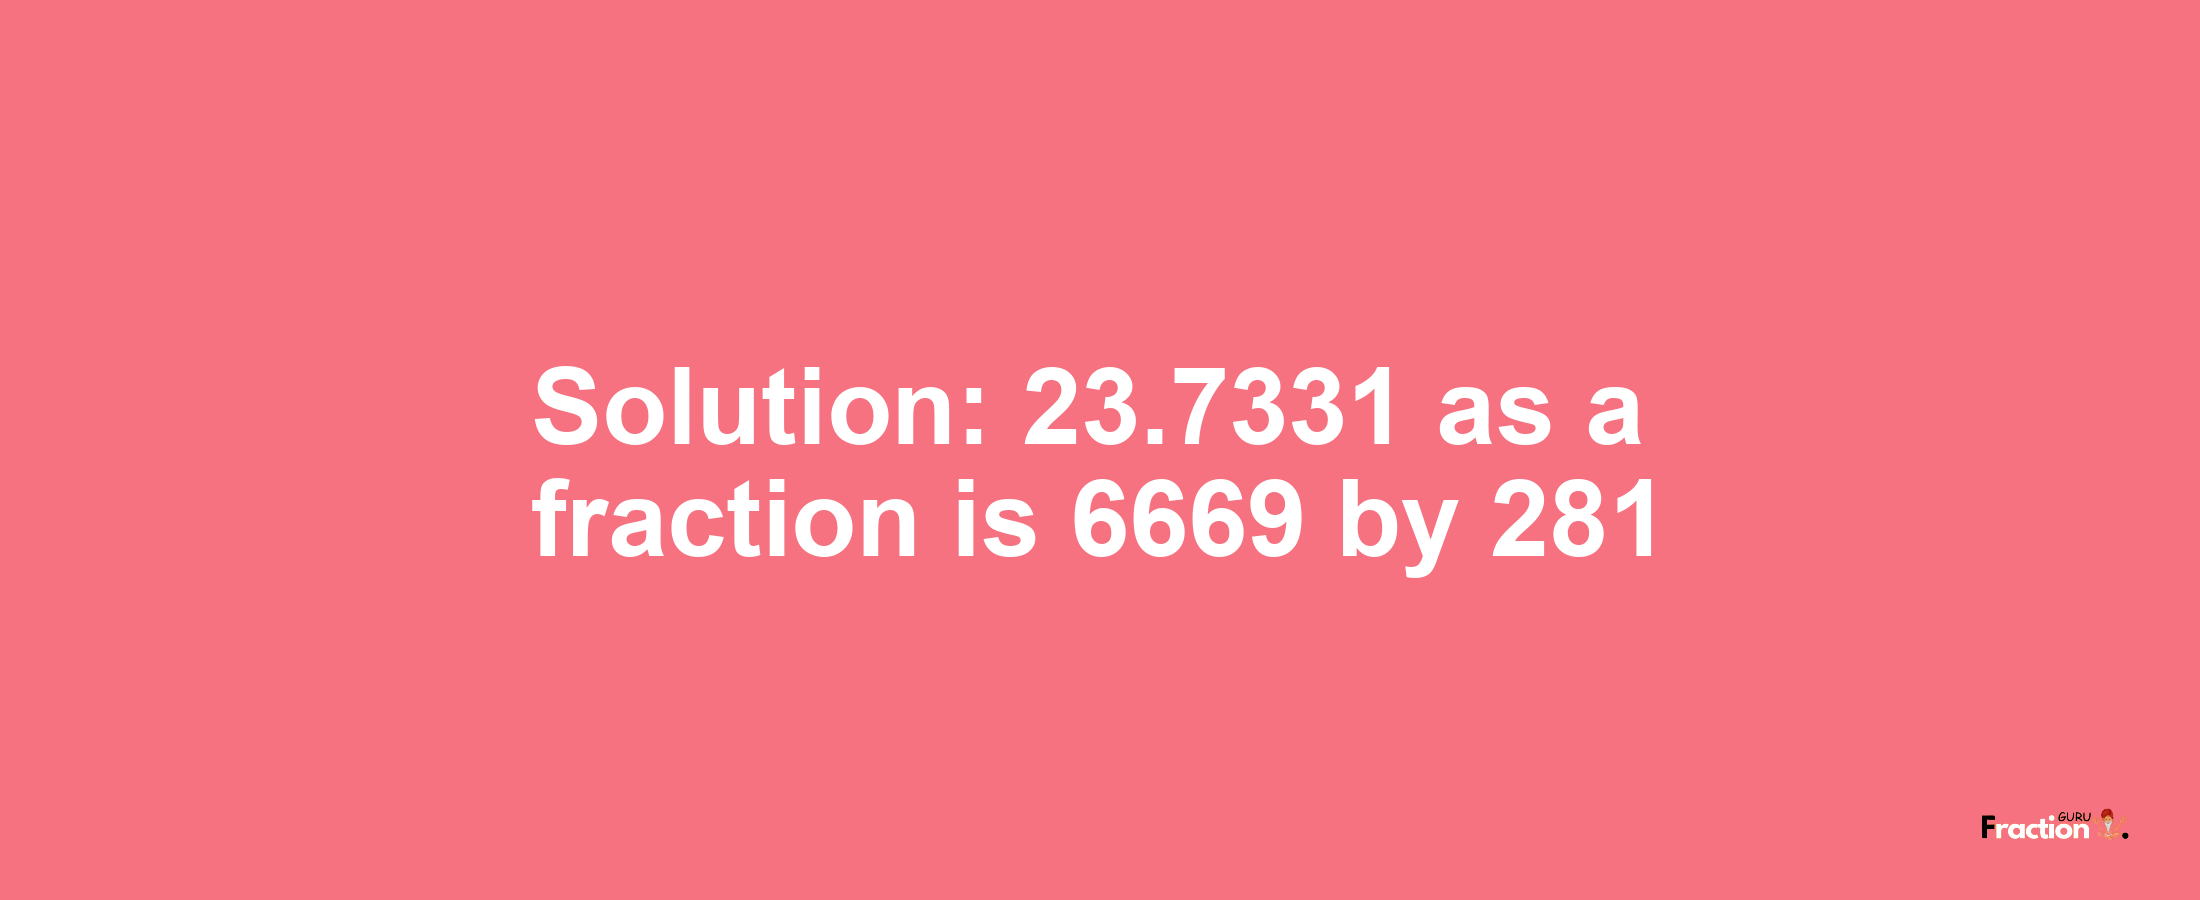 Solution:23.7331 as a fraction is 6669/281